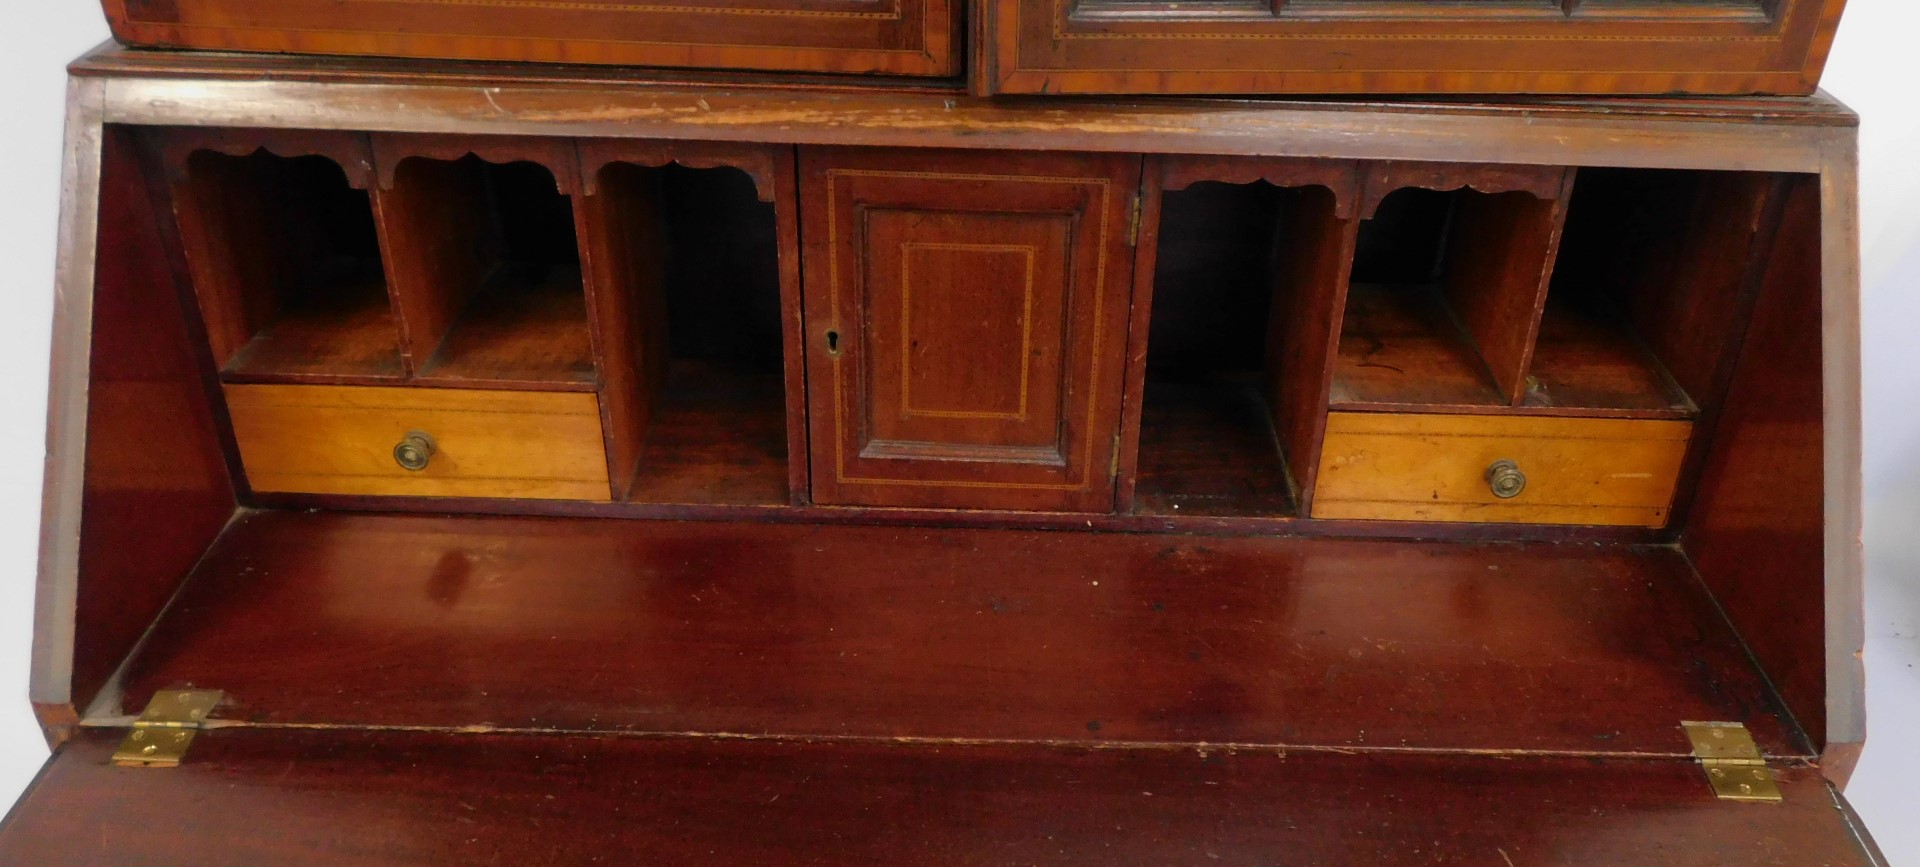 A late 19thC mahogany and inlaid bureau bookcase, the top with swan neck pediment above a - Image 3 of 5